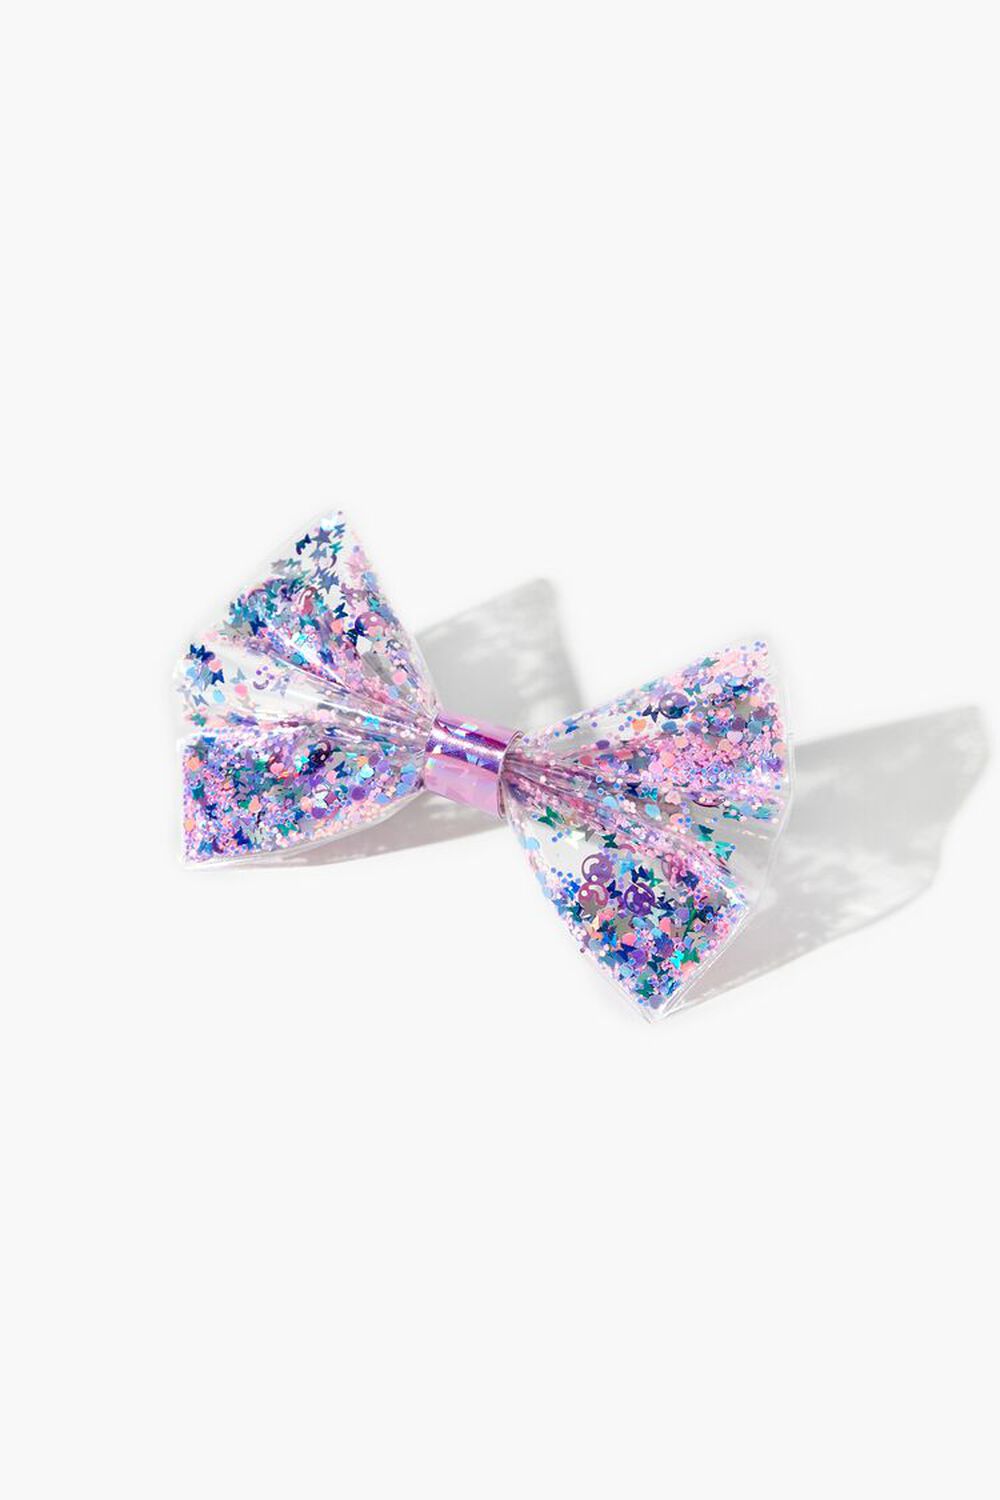 BLUE/PINK Girls Glittered Confetti Bow Hair Clip (Kids), image 1